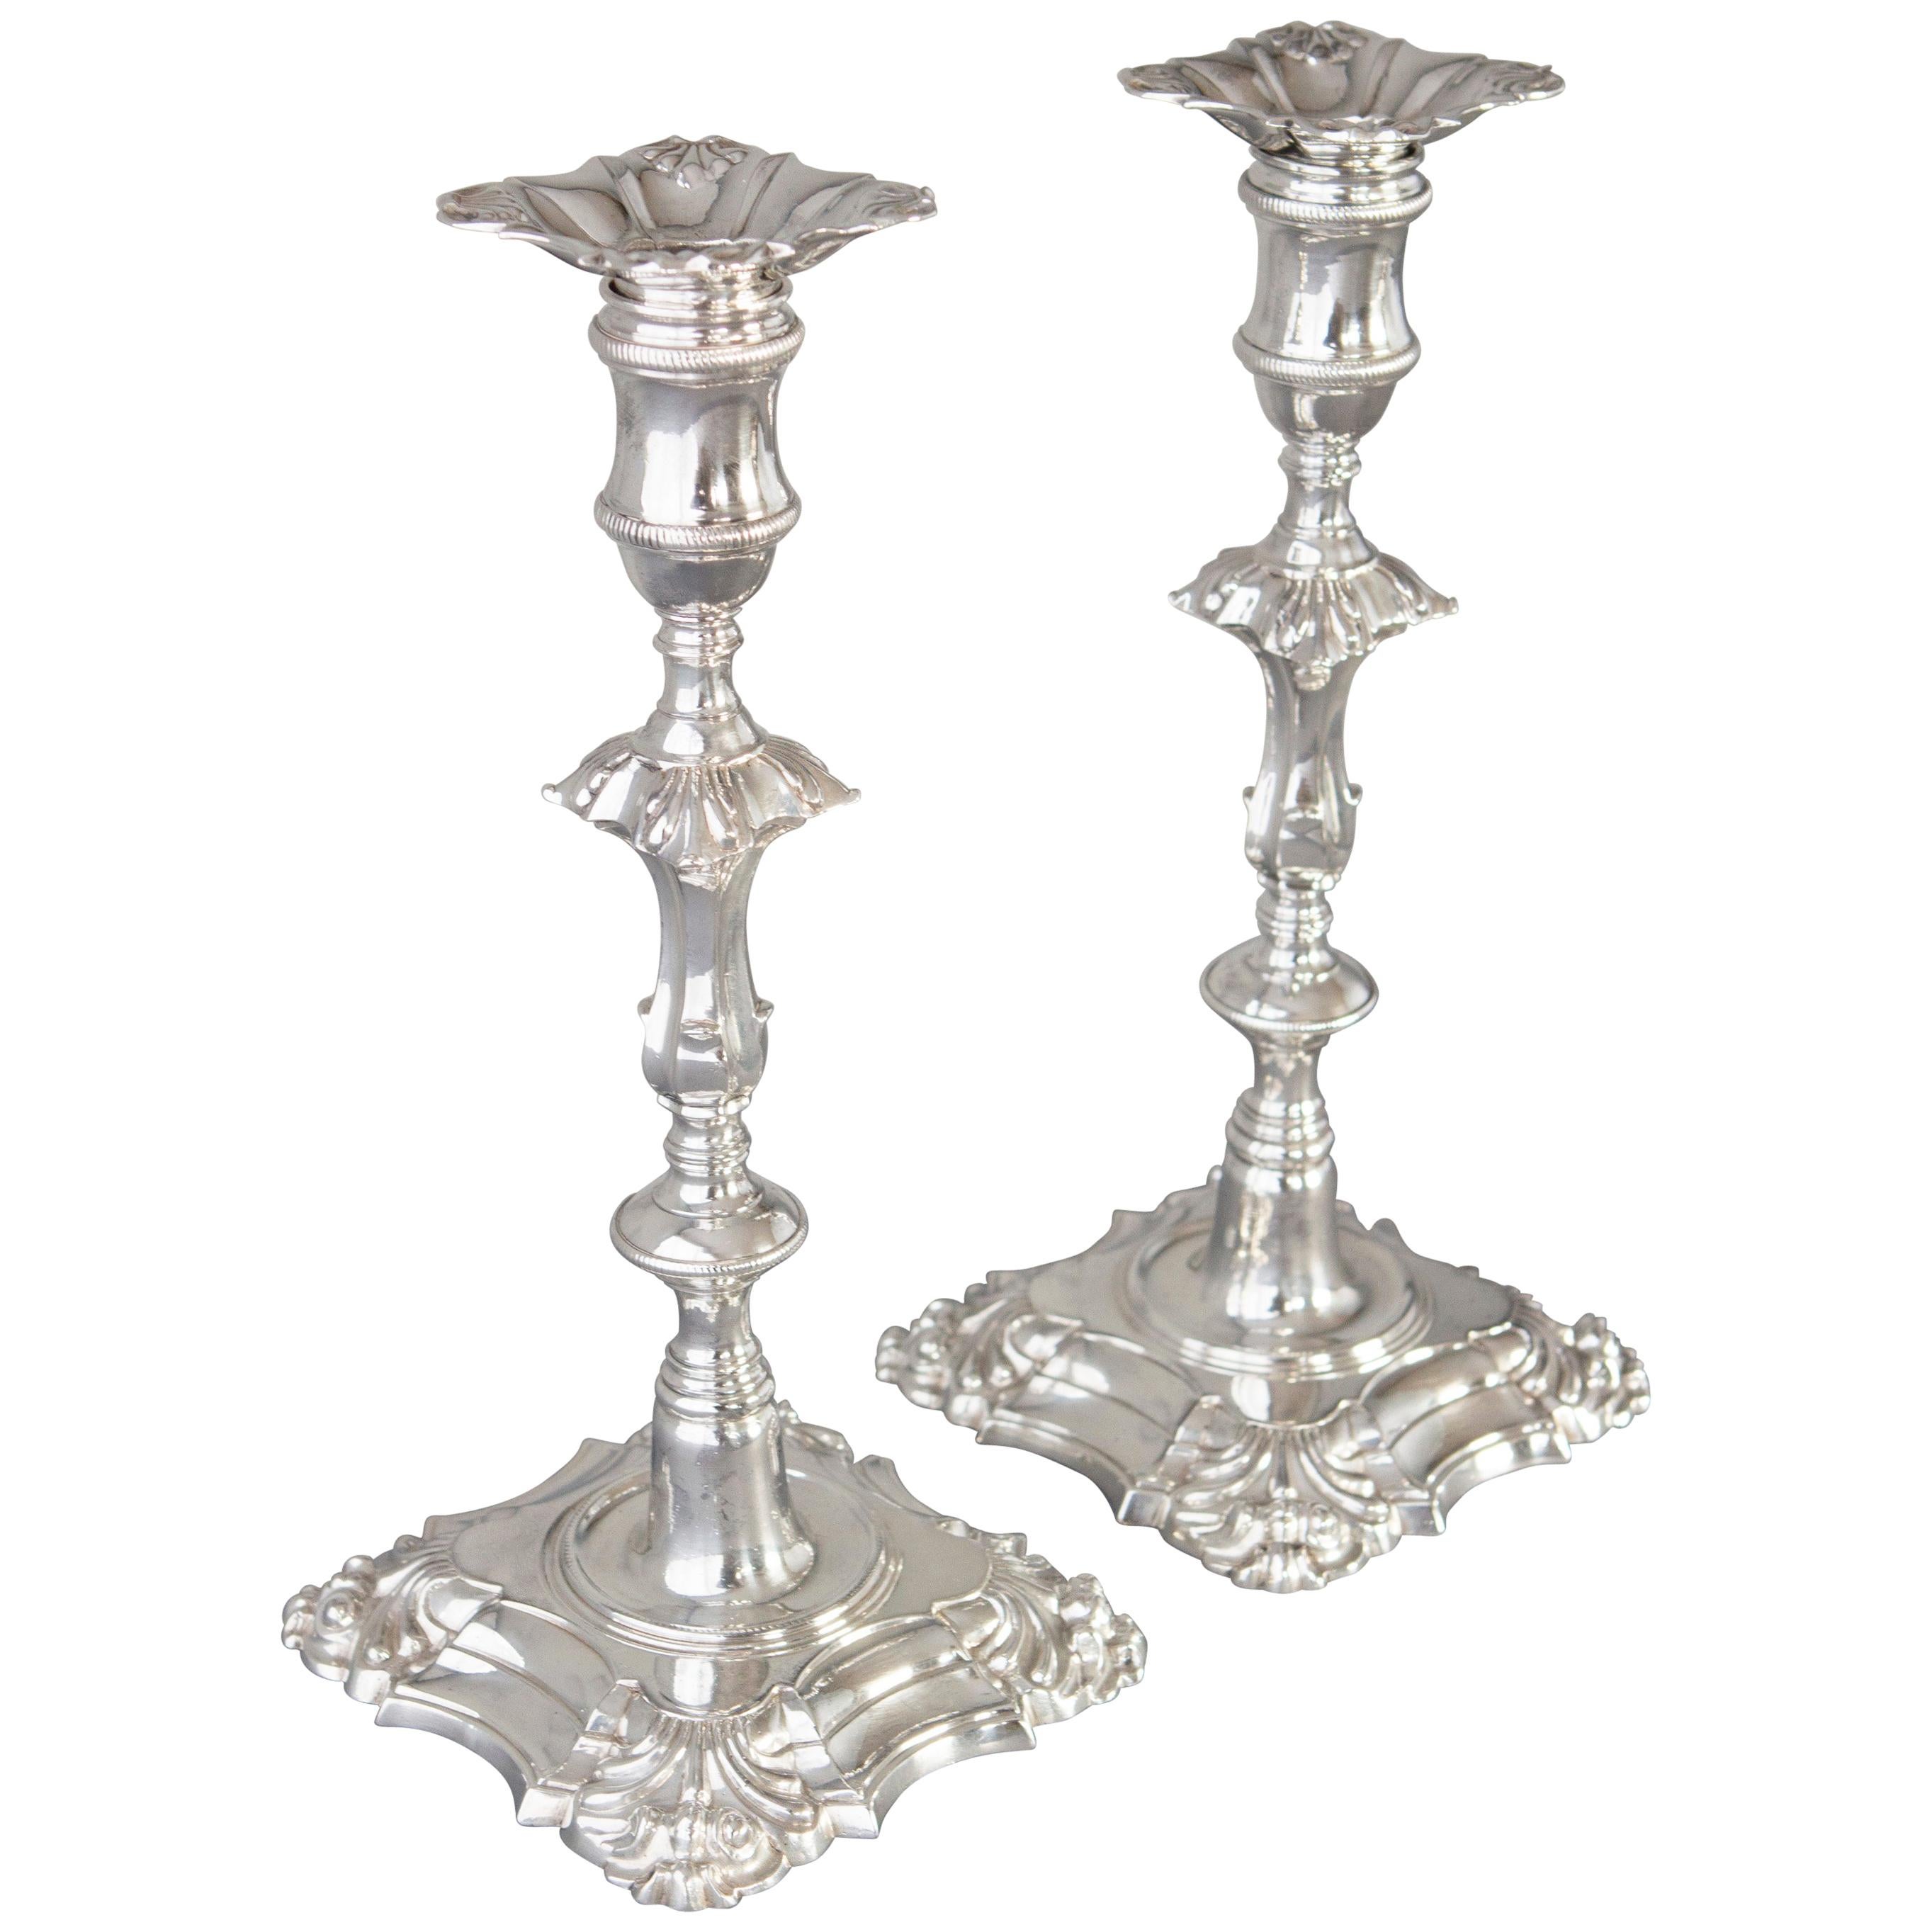 Pair of Cast George III Silver Candlesticks, London, 1762